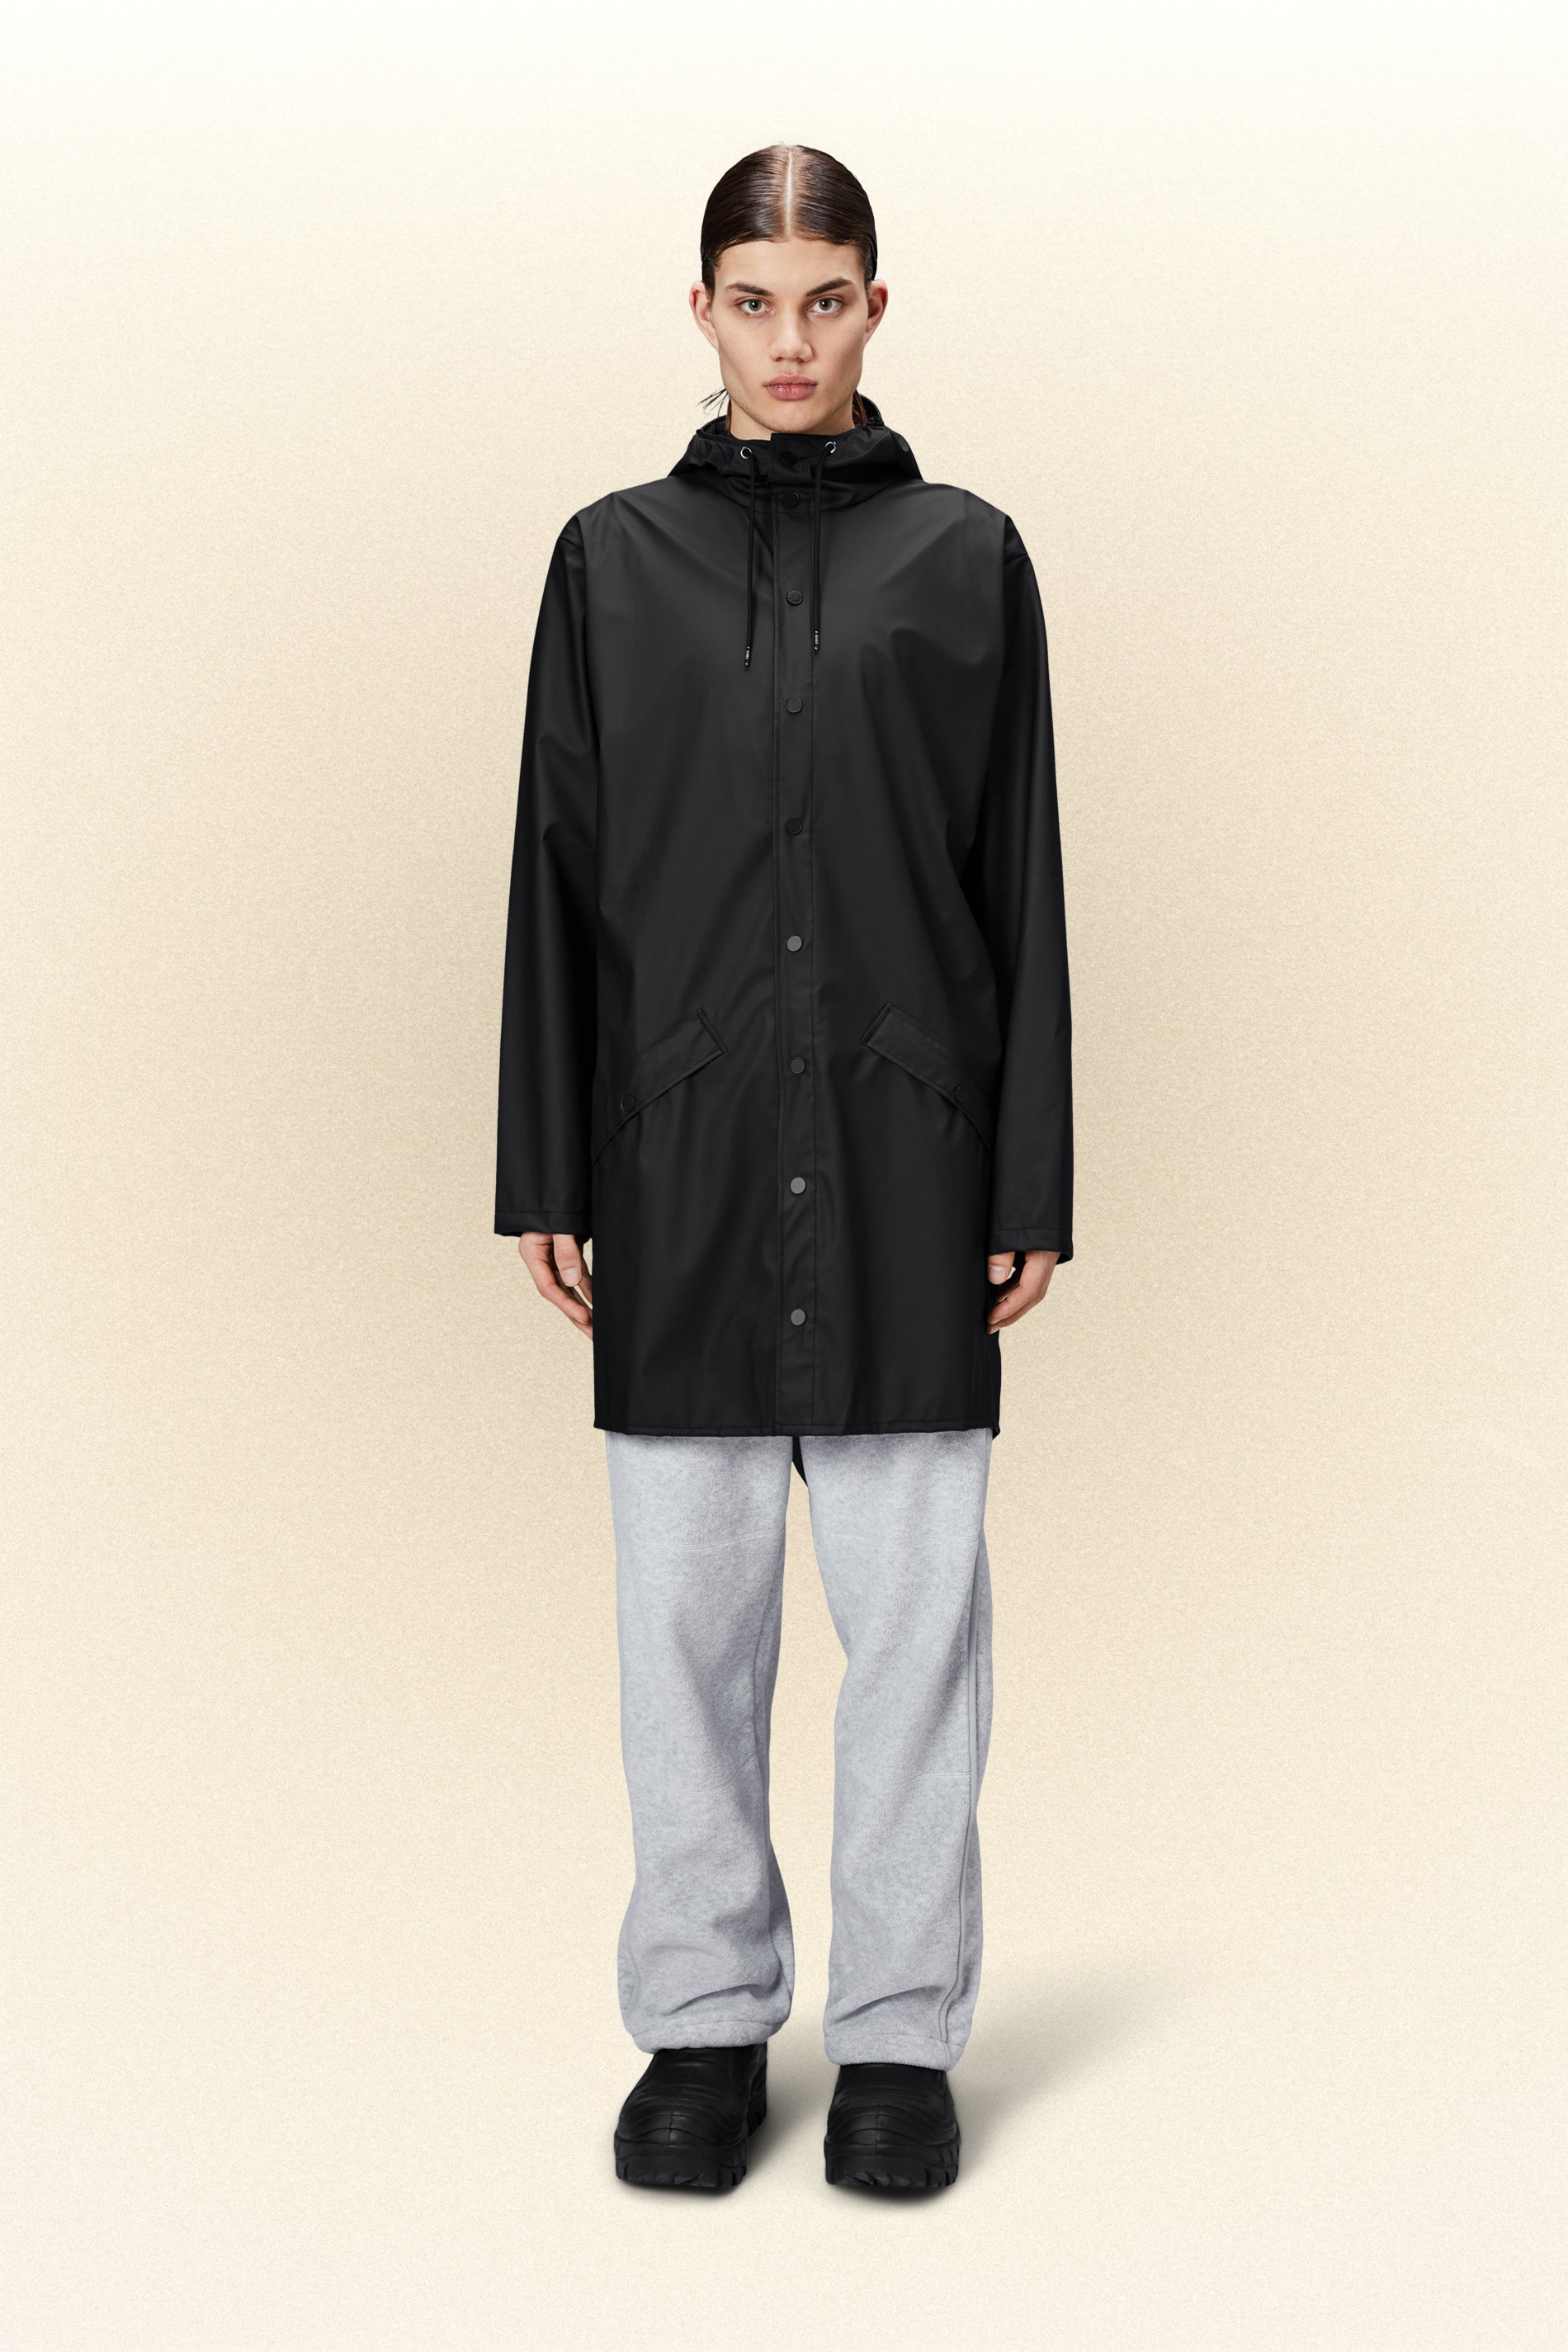 Rains® Long Jacket in Black for $180 | Free Shipping